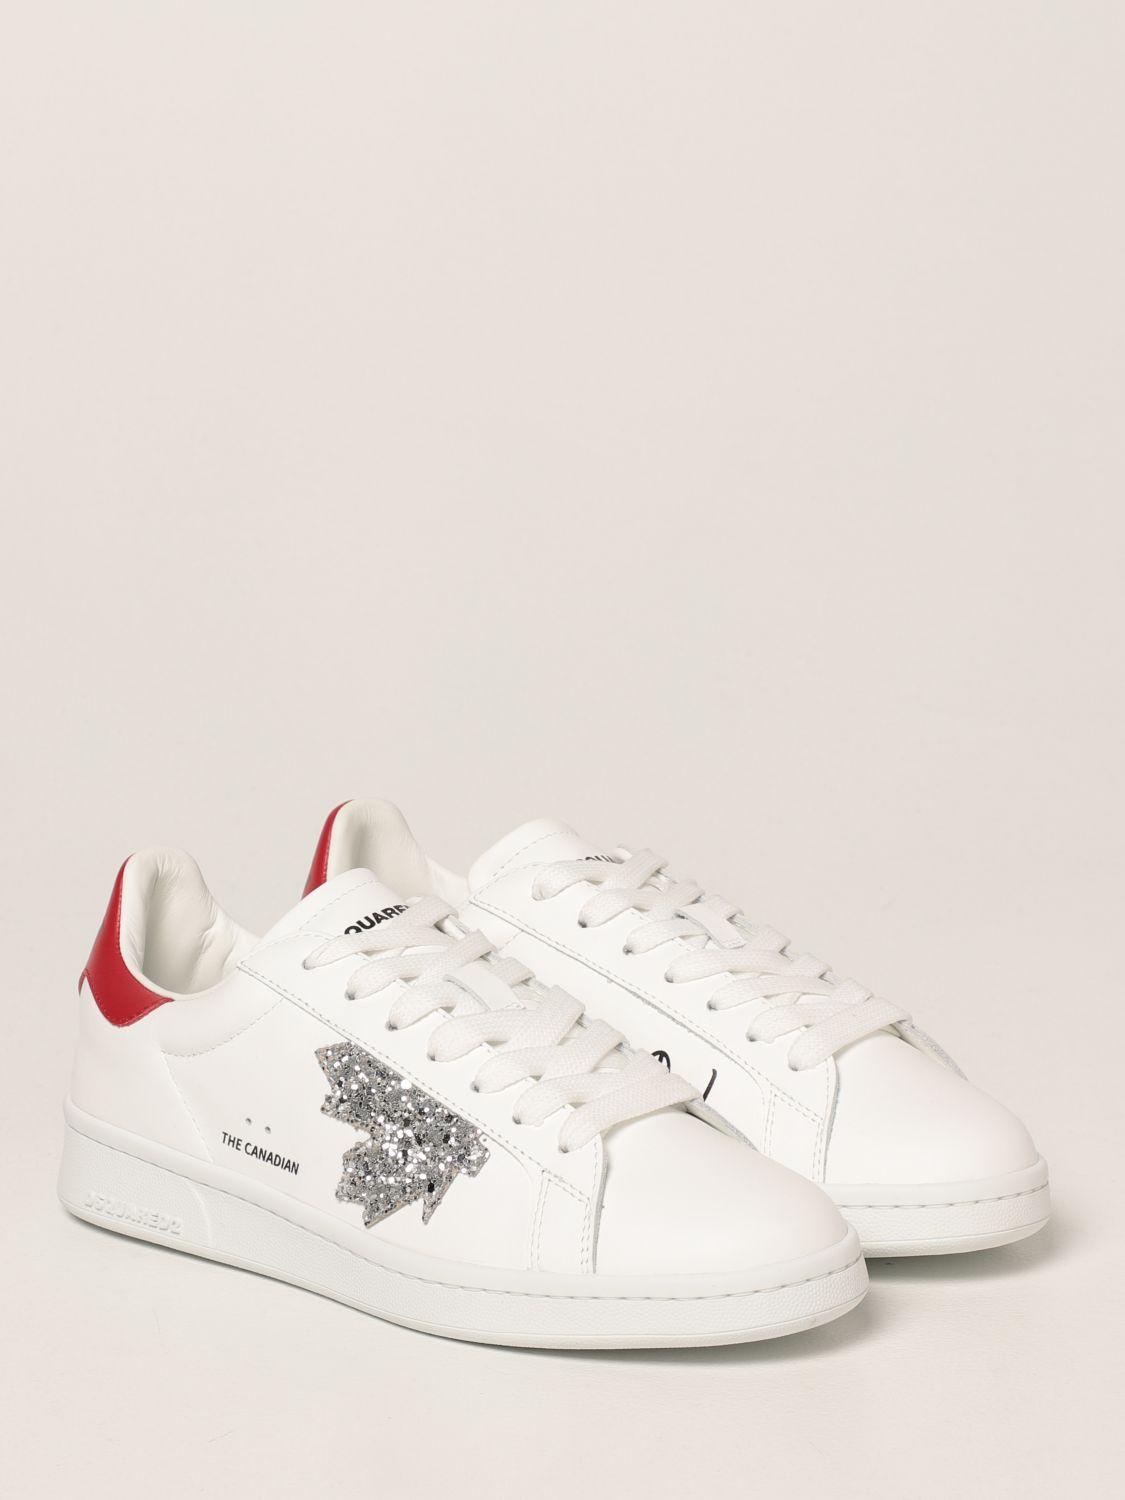 DSQUARED2: Boxer leather sneakers - White | Dsquared2 sneakers SNW0134 ...